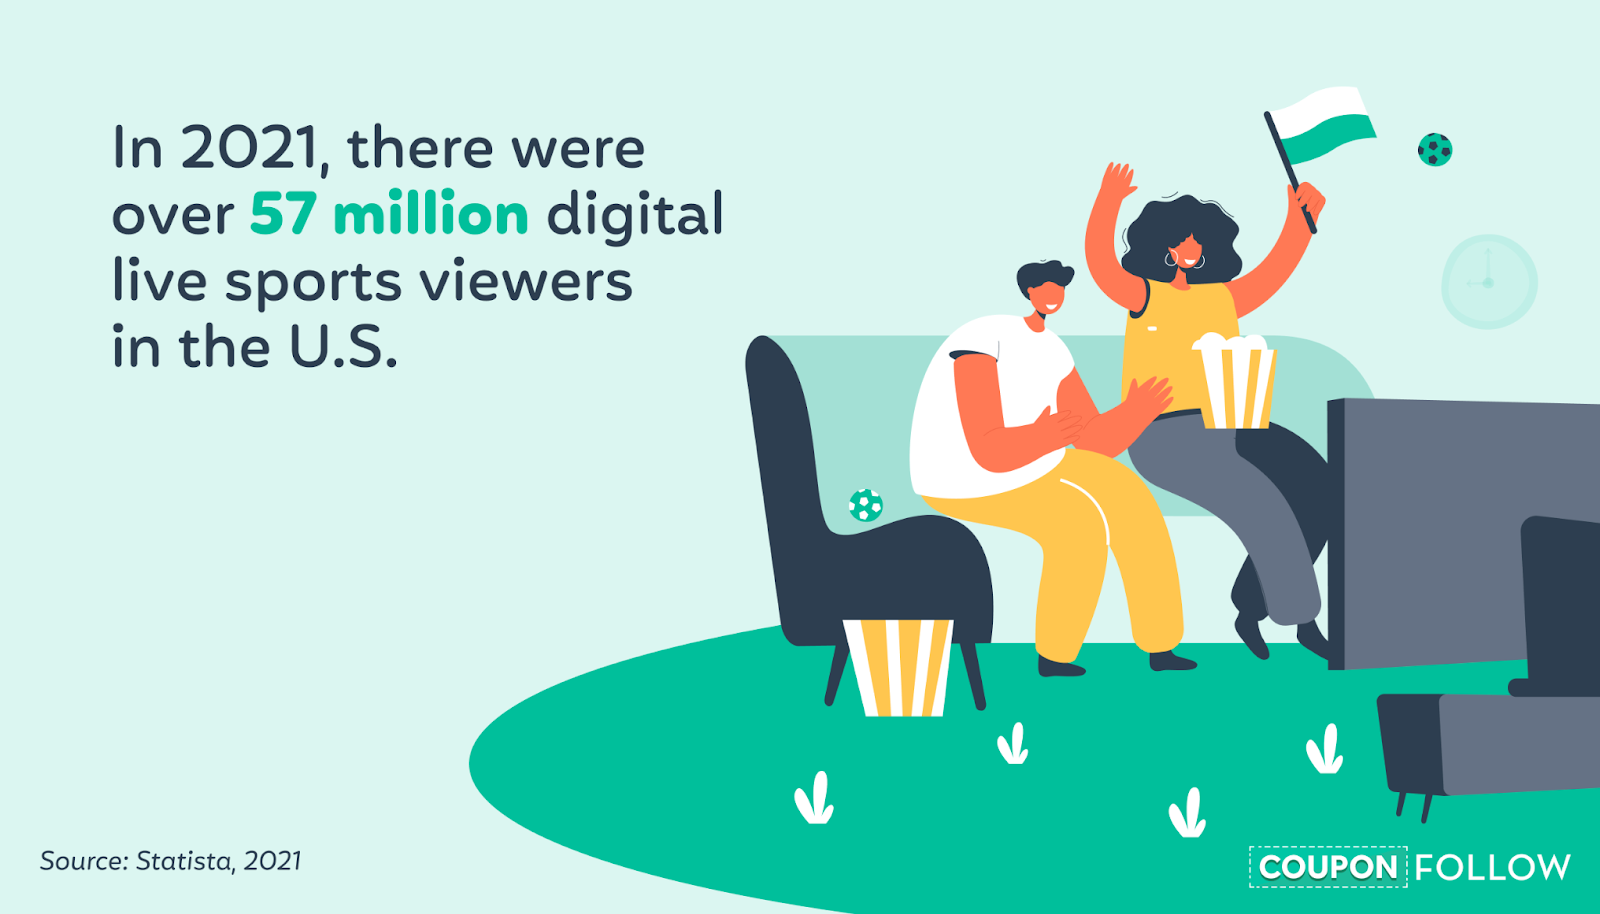  image showing the number of digital live sports viewers in the U.S. in 2021